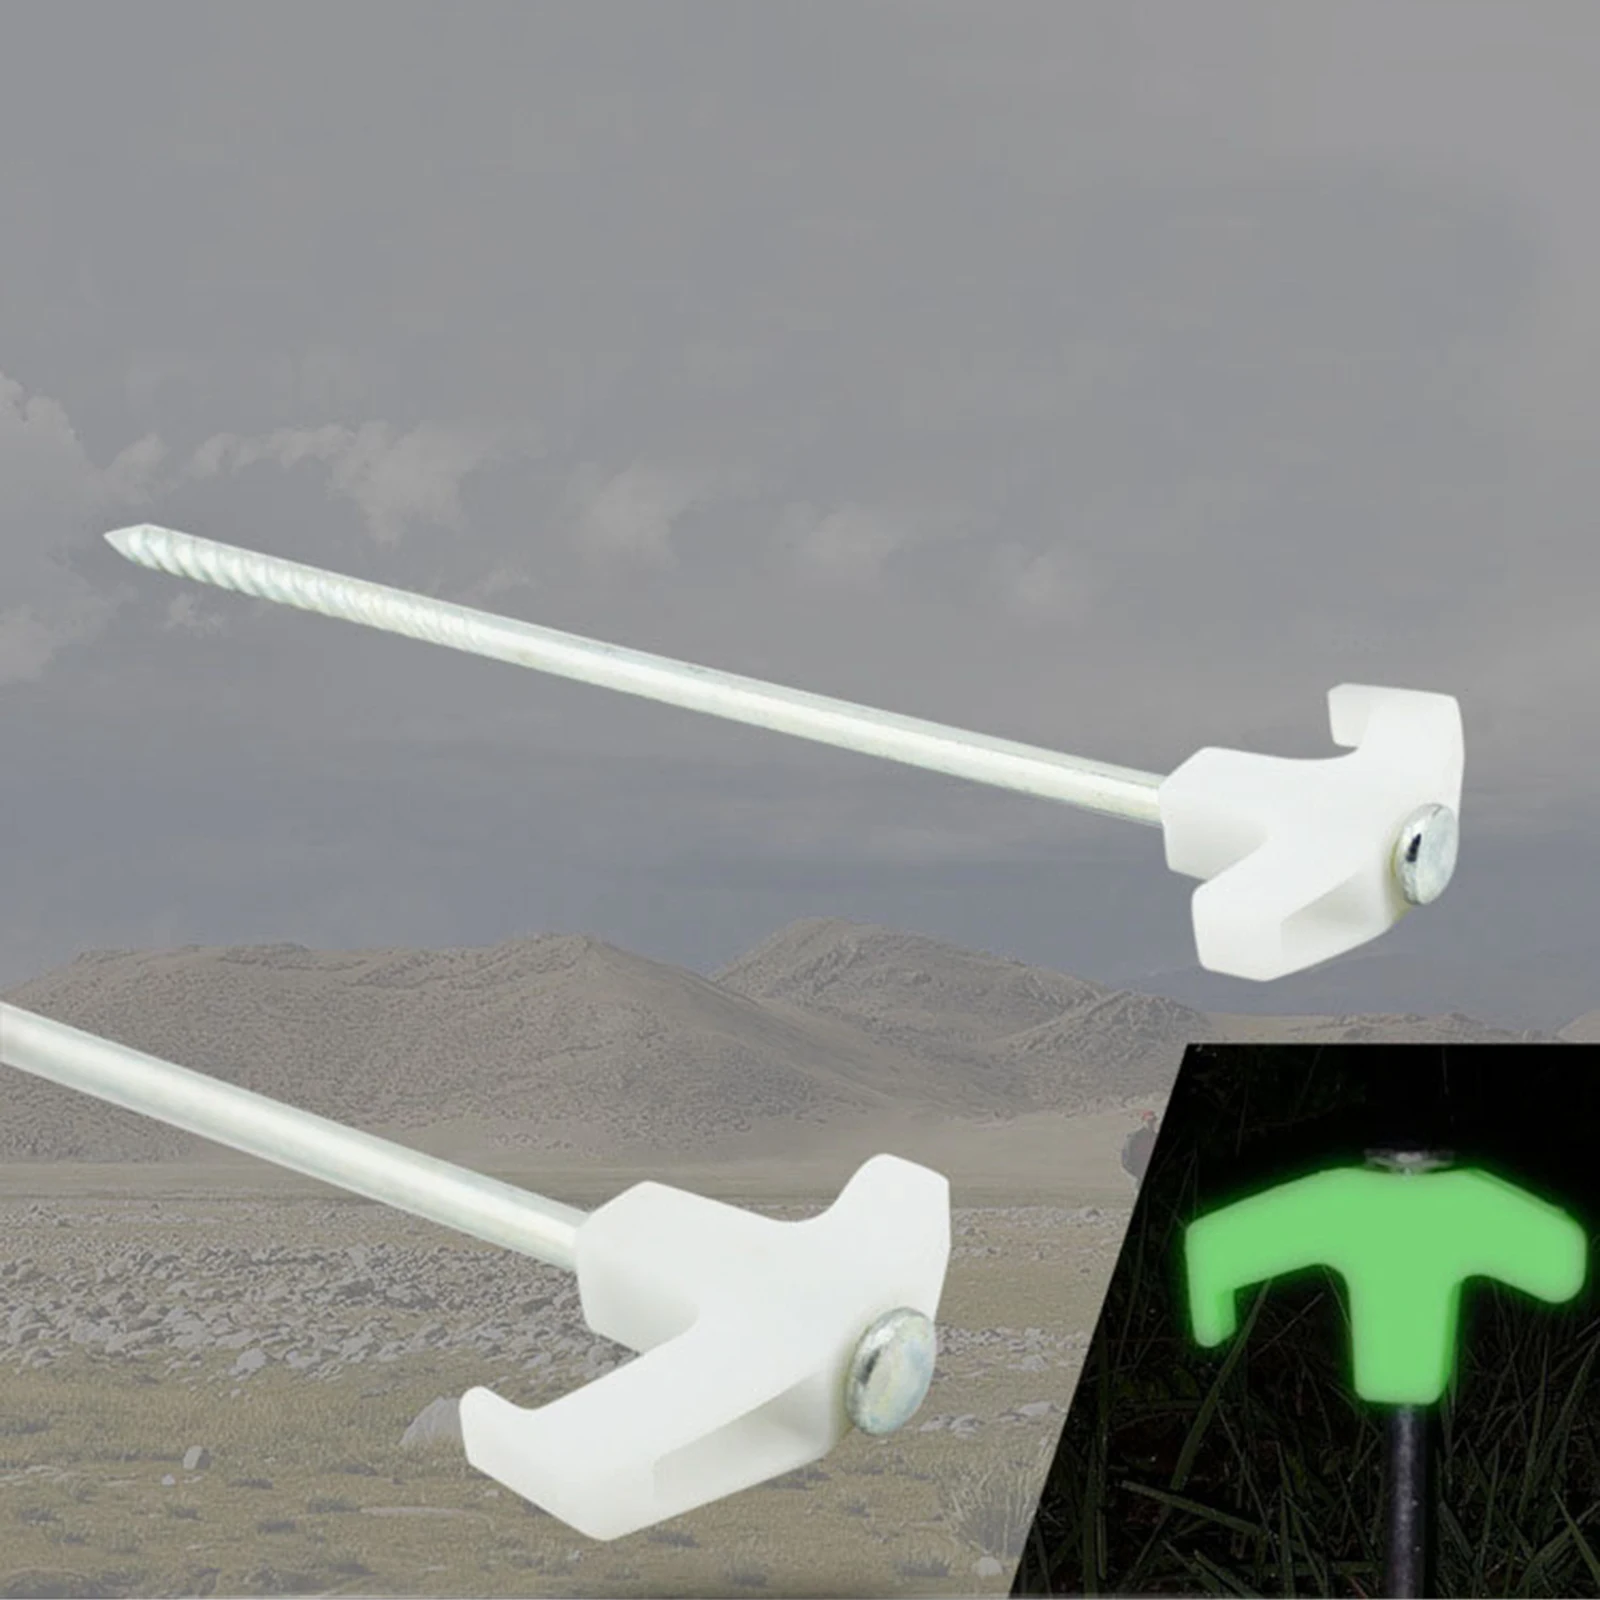 Glow in The Dark Ground Tent Pegs Outdoor Safety Camping Tarpaulin Hooks For Fixing Grass Cloth, Greening, Fixed Lawn